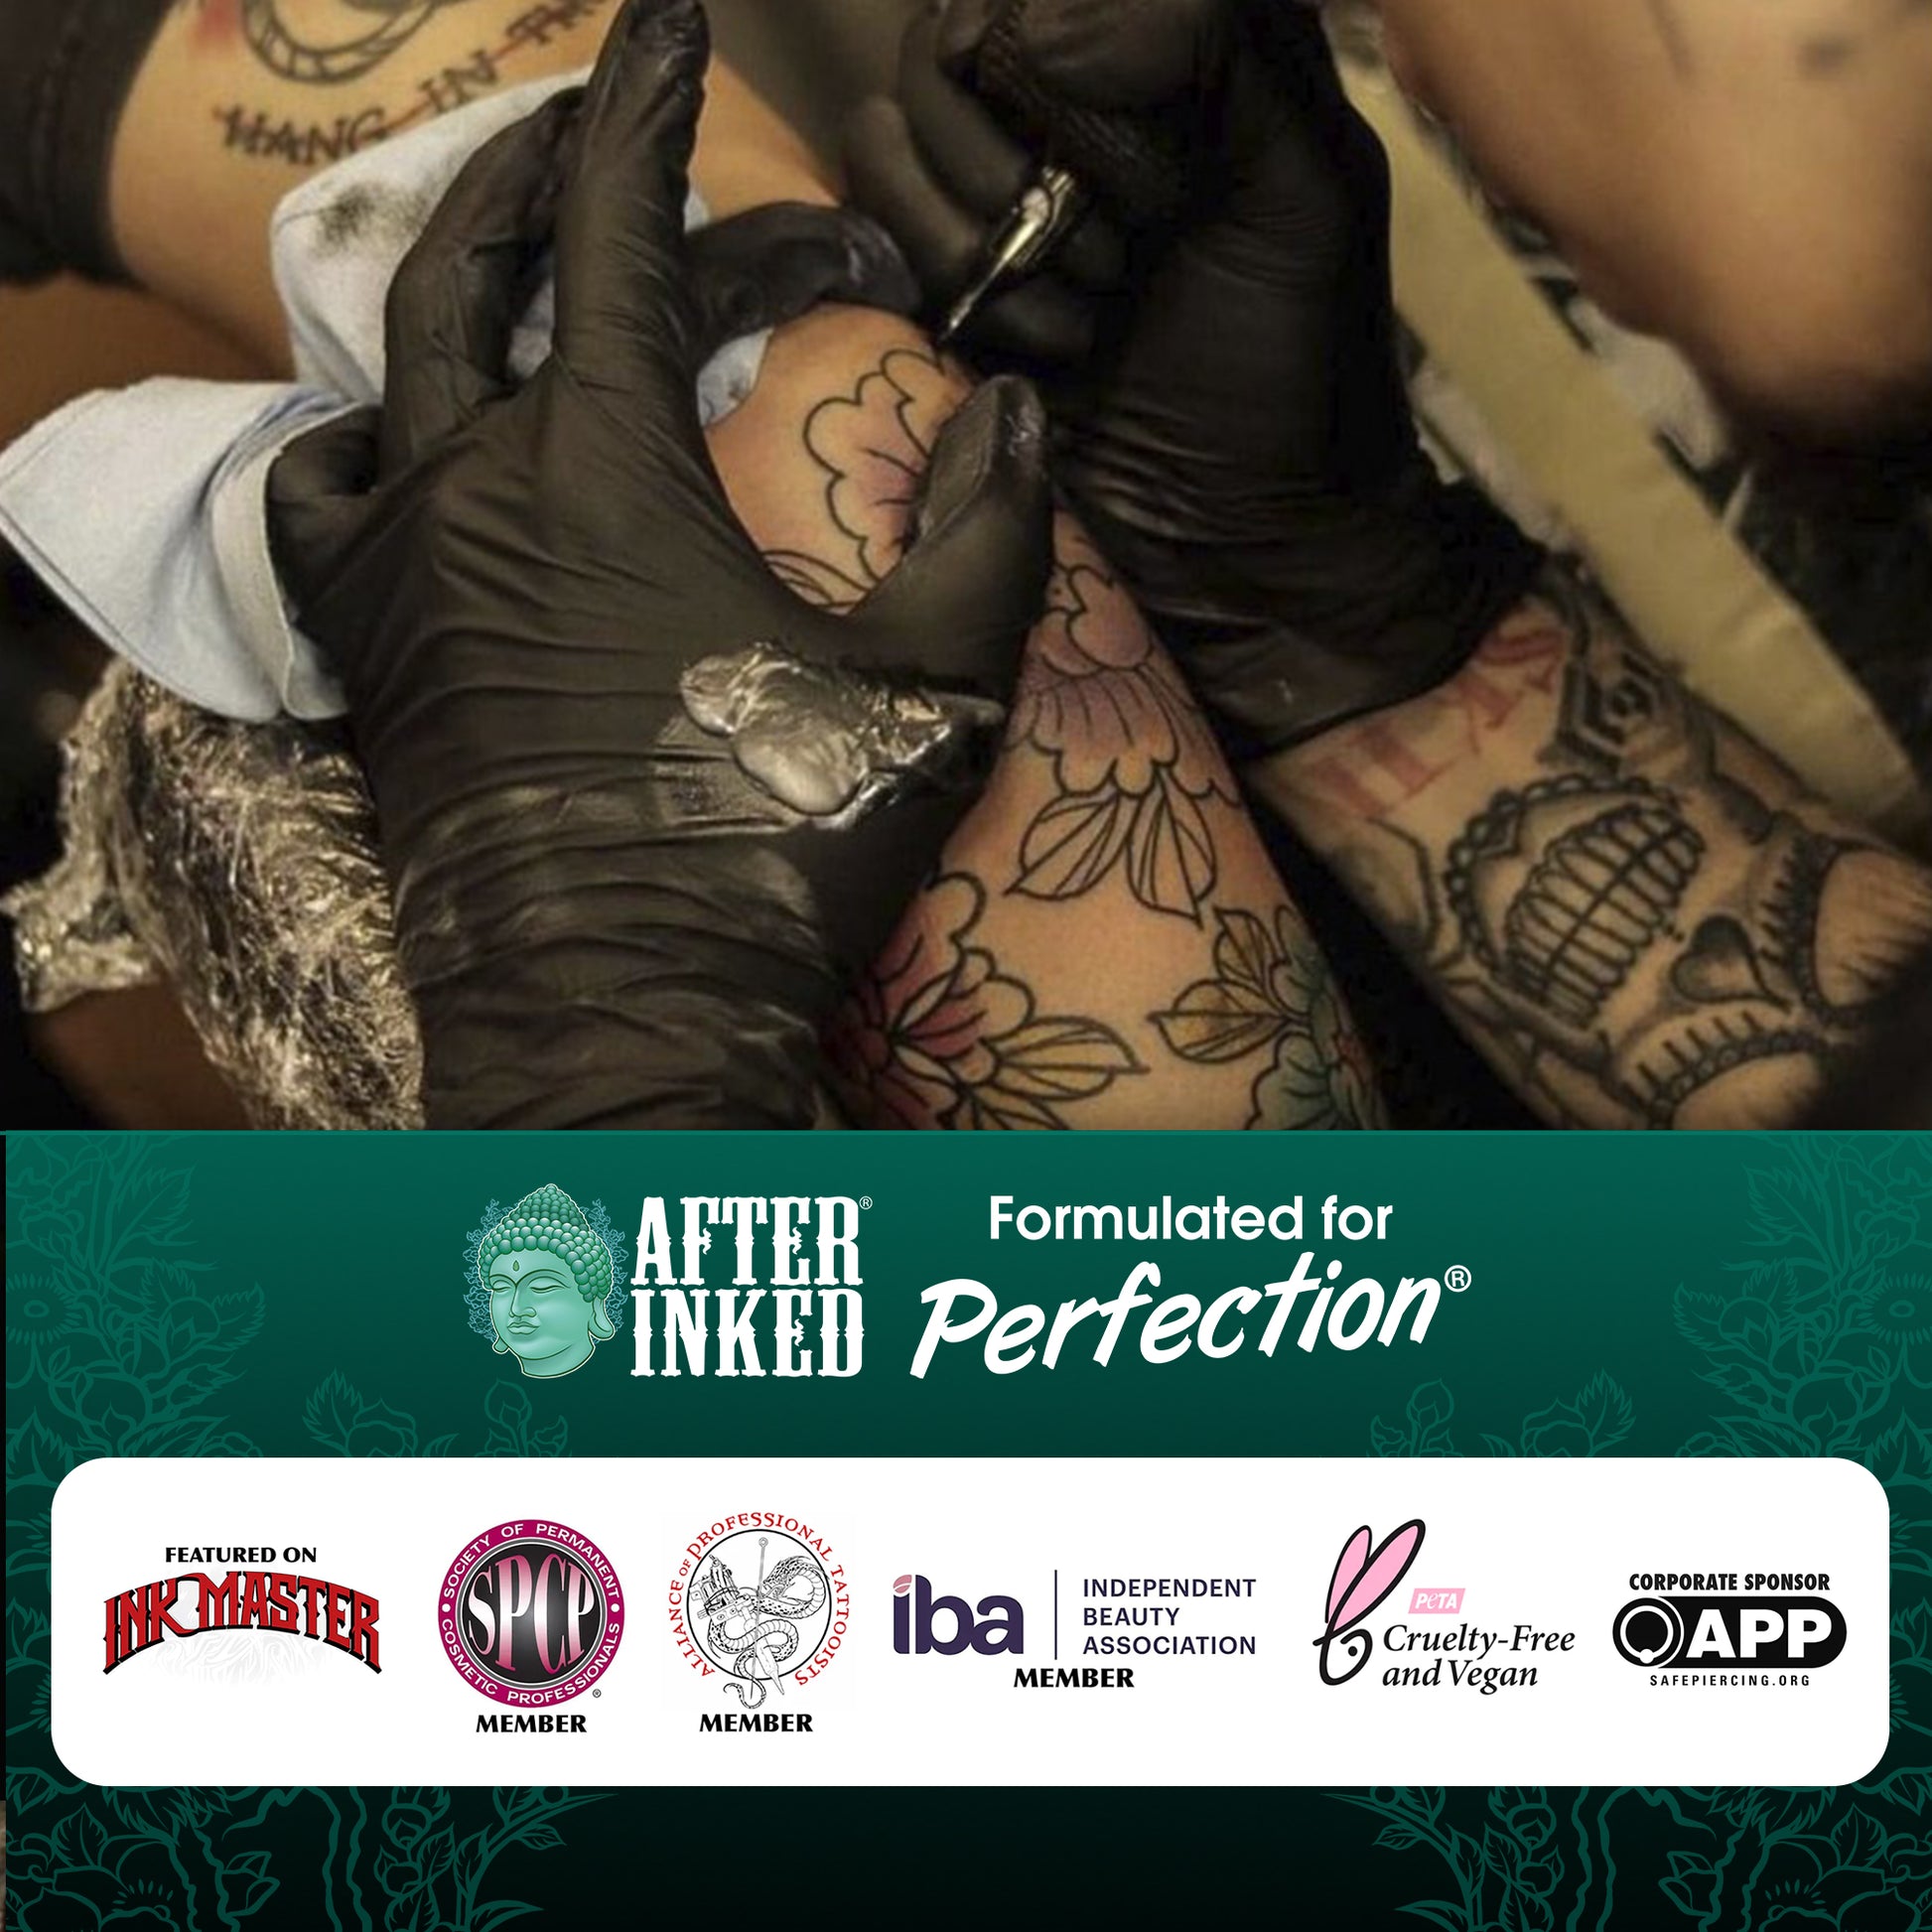 After Inked multipurpose Non-petroleum jelly. Petroleum-free, Formulated for Perfection.